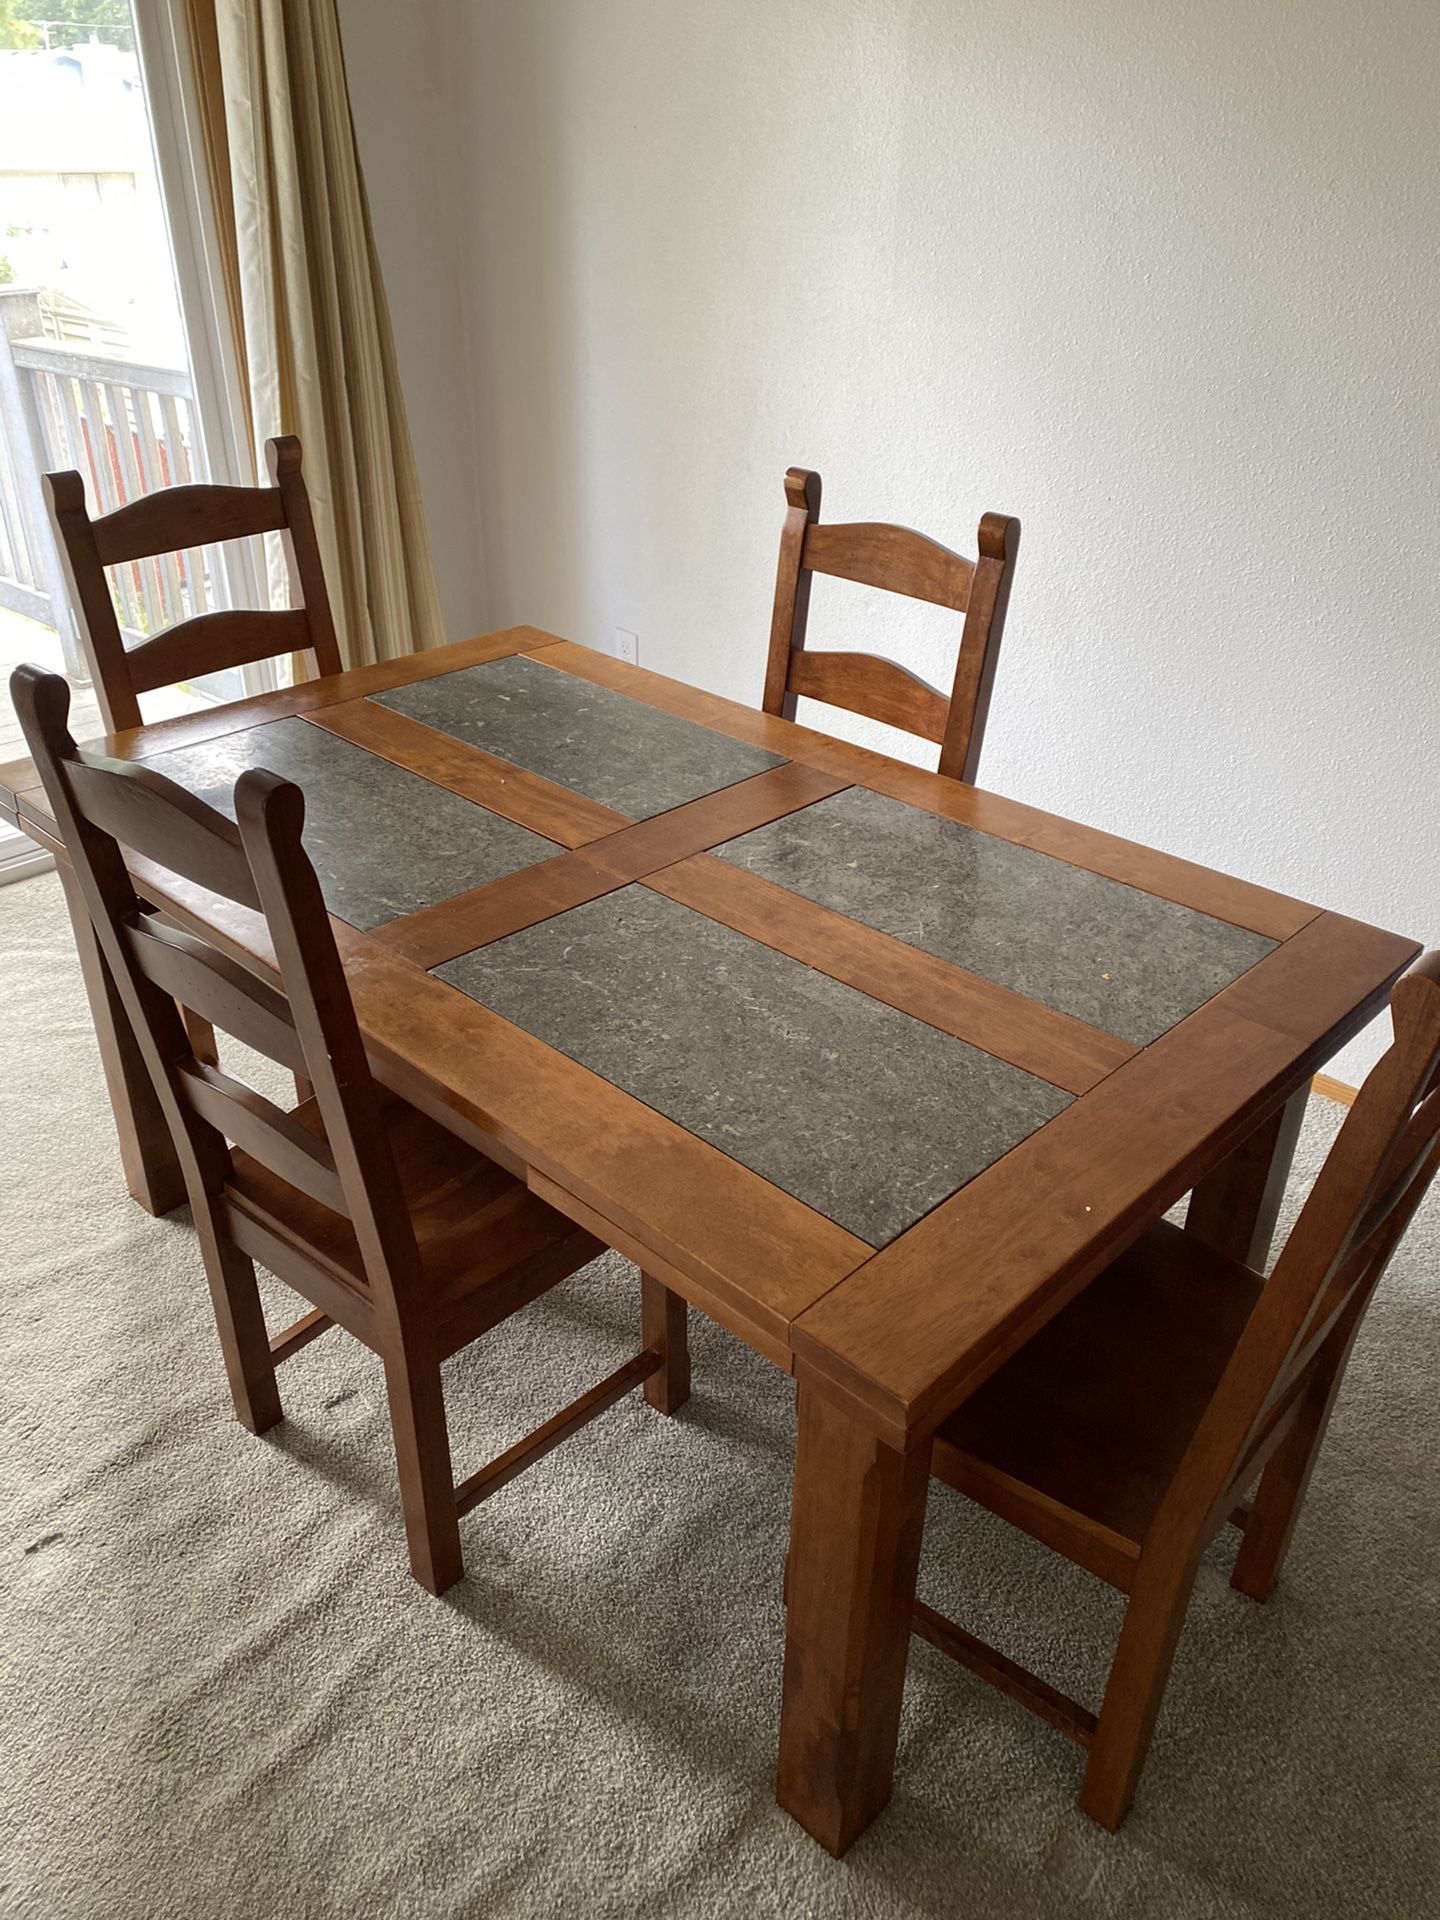 Solid wood & stone inlay dining table & 4 chairs